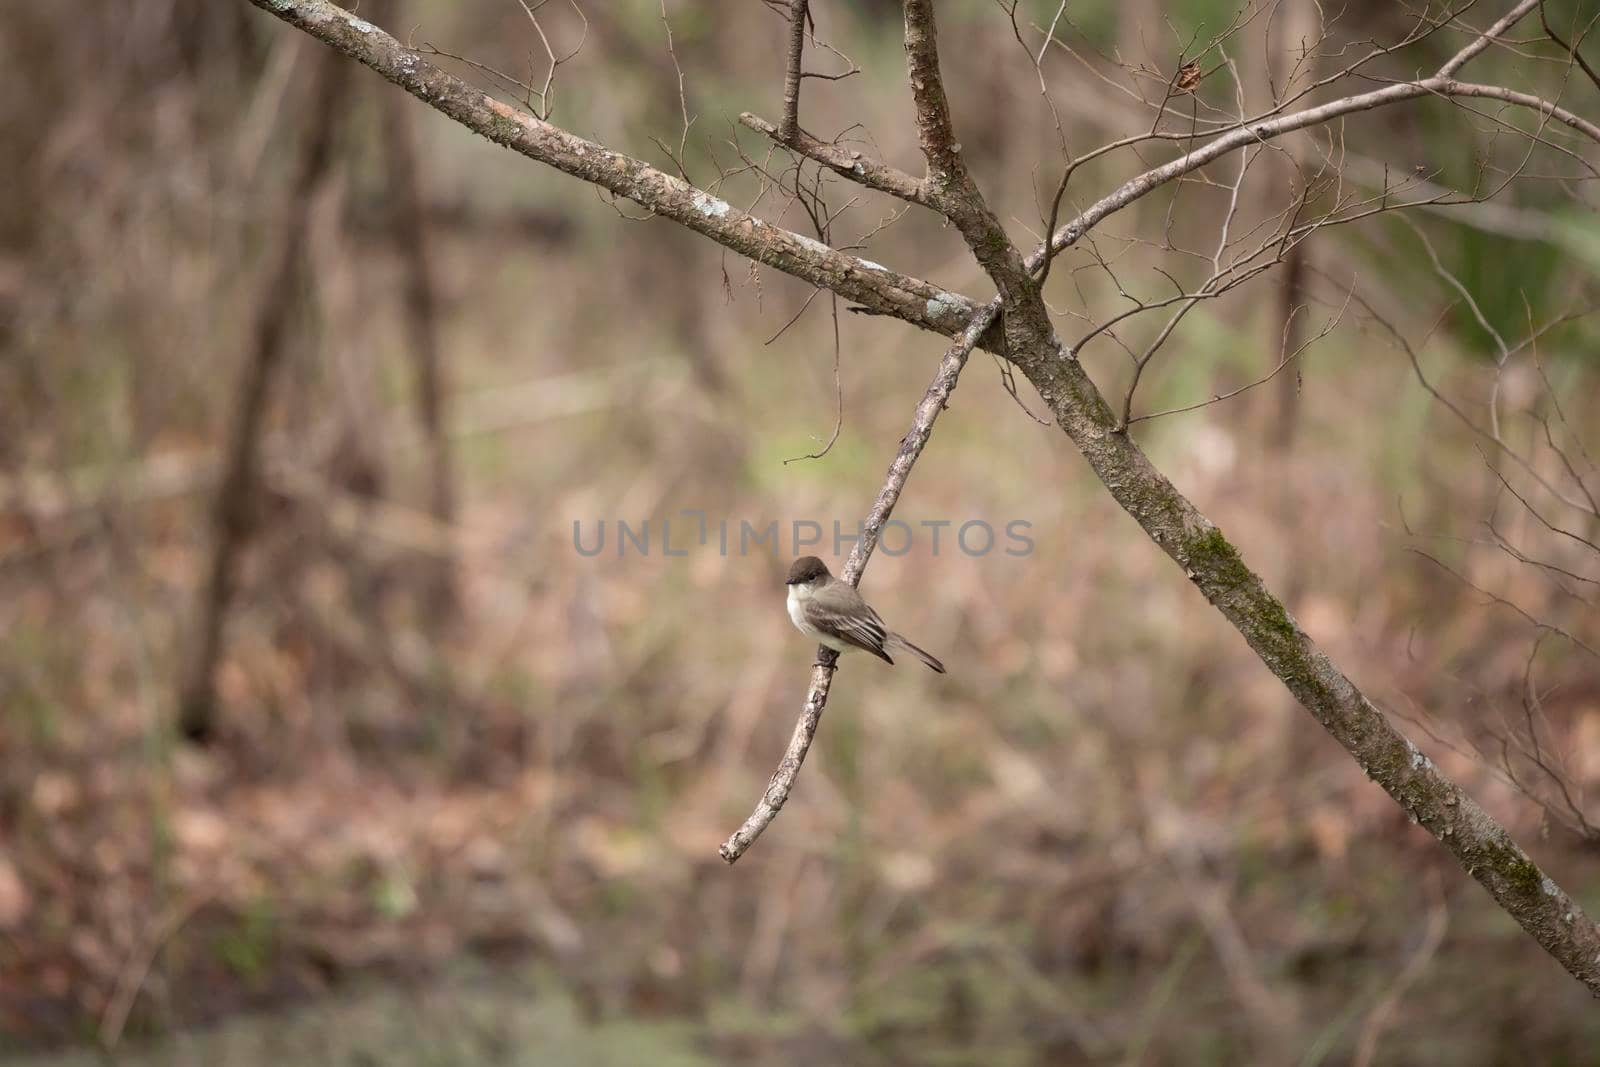 Eastern phoebe (Sayornis phoebe) perched on a small, broken branch